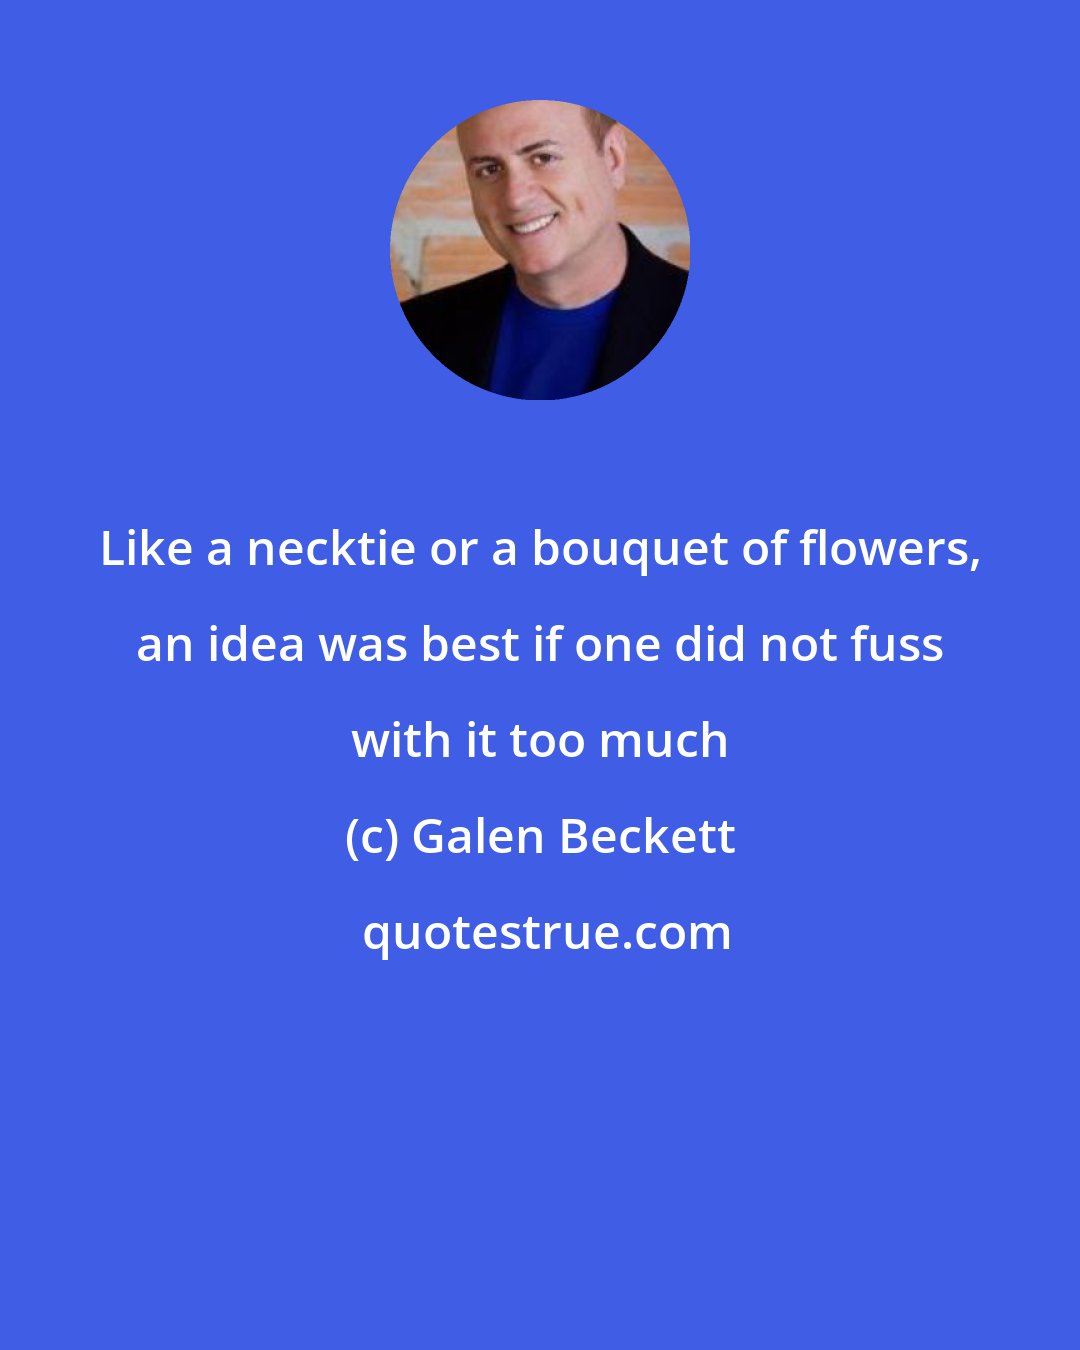 Galen Beckett: Like a necktie or a bouquet of flowers, an idea was best if one did not fuss with it too much